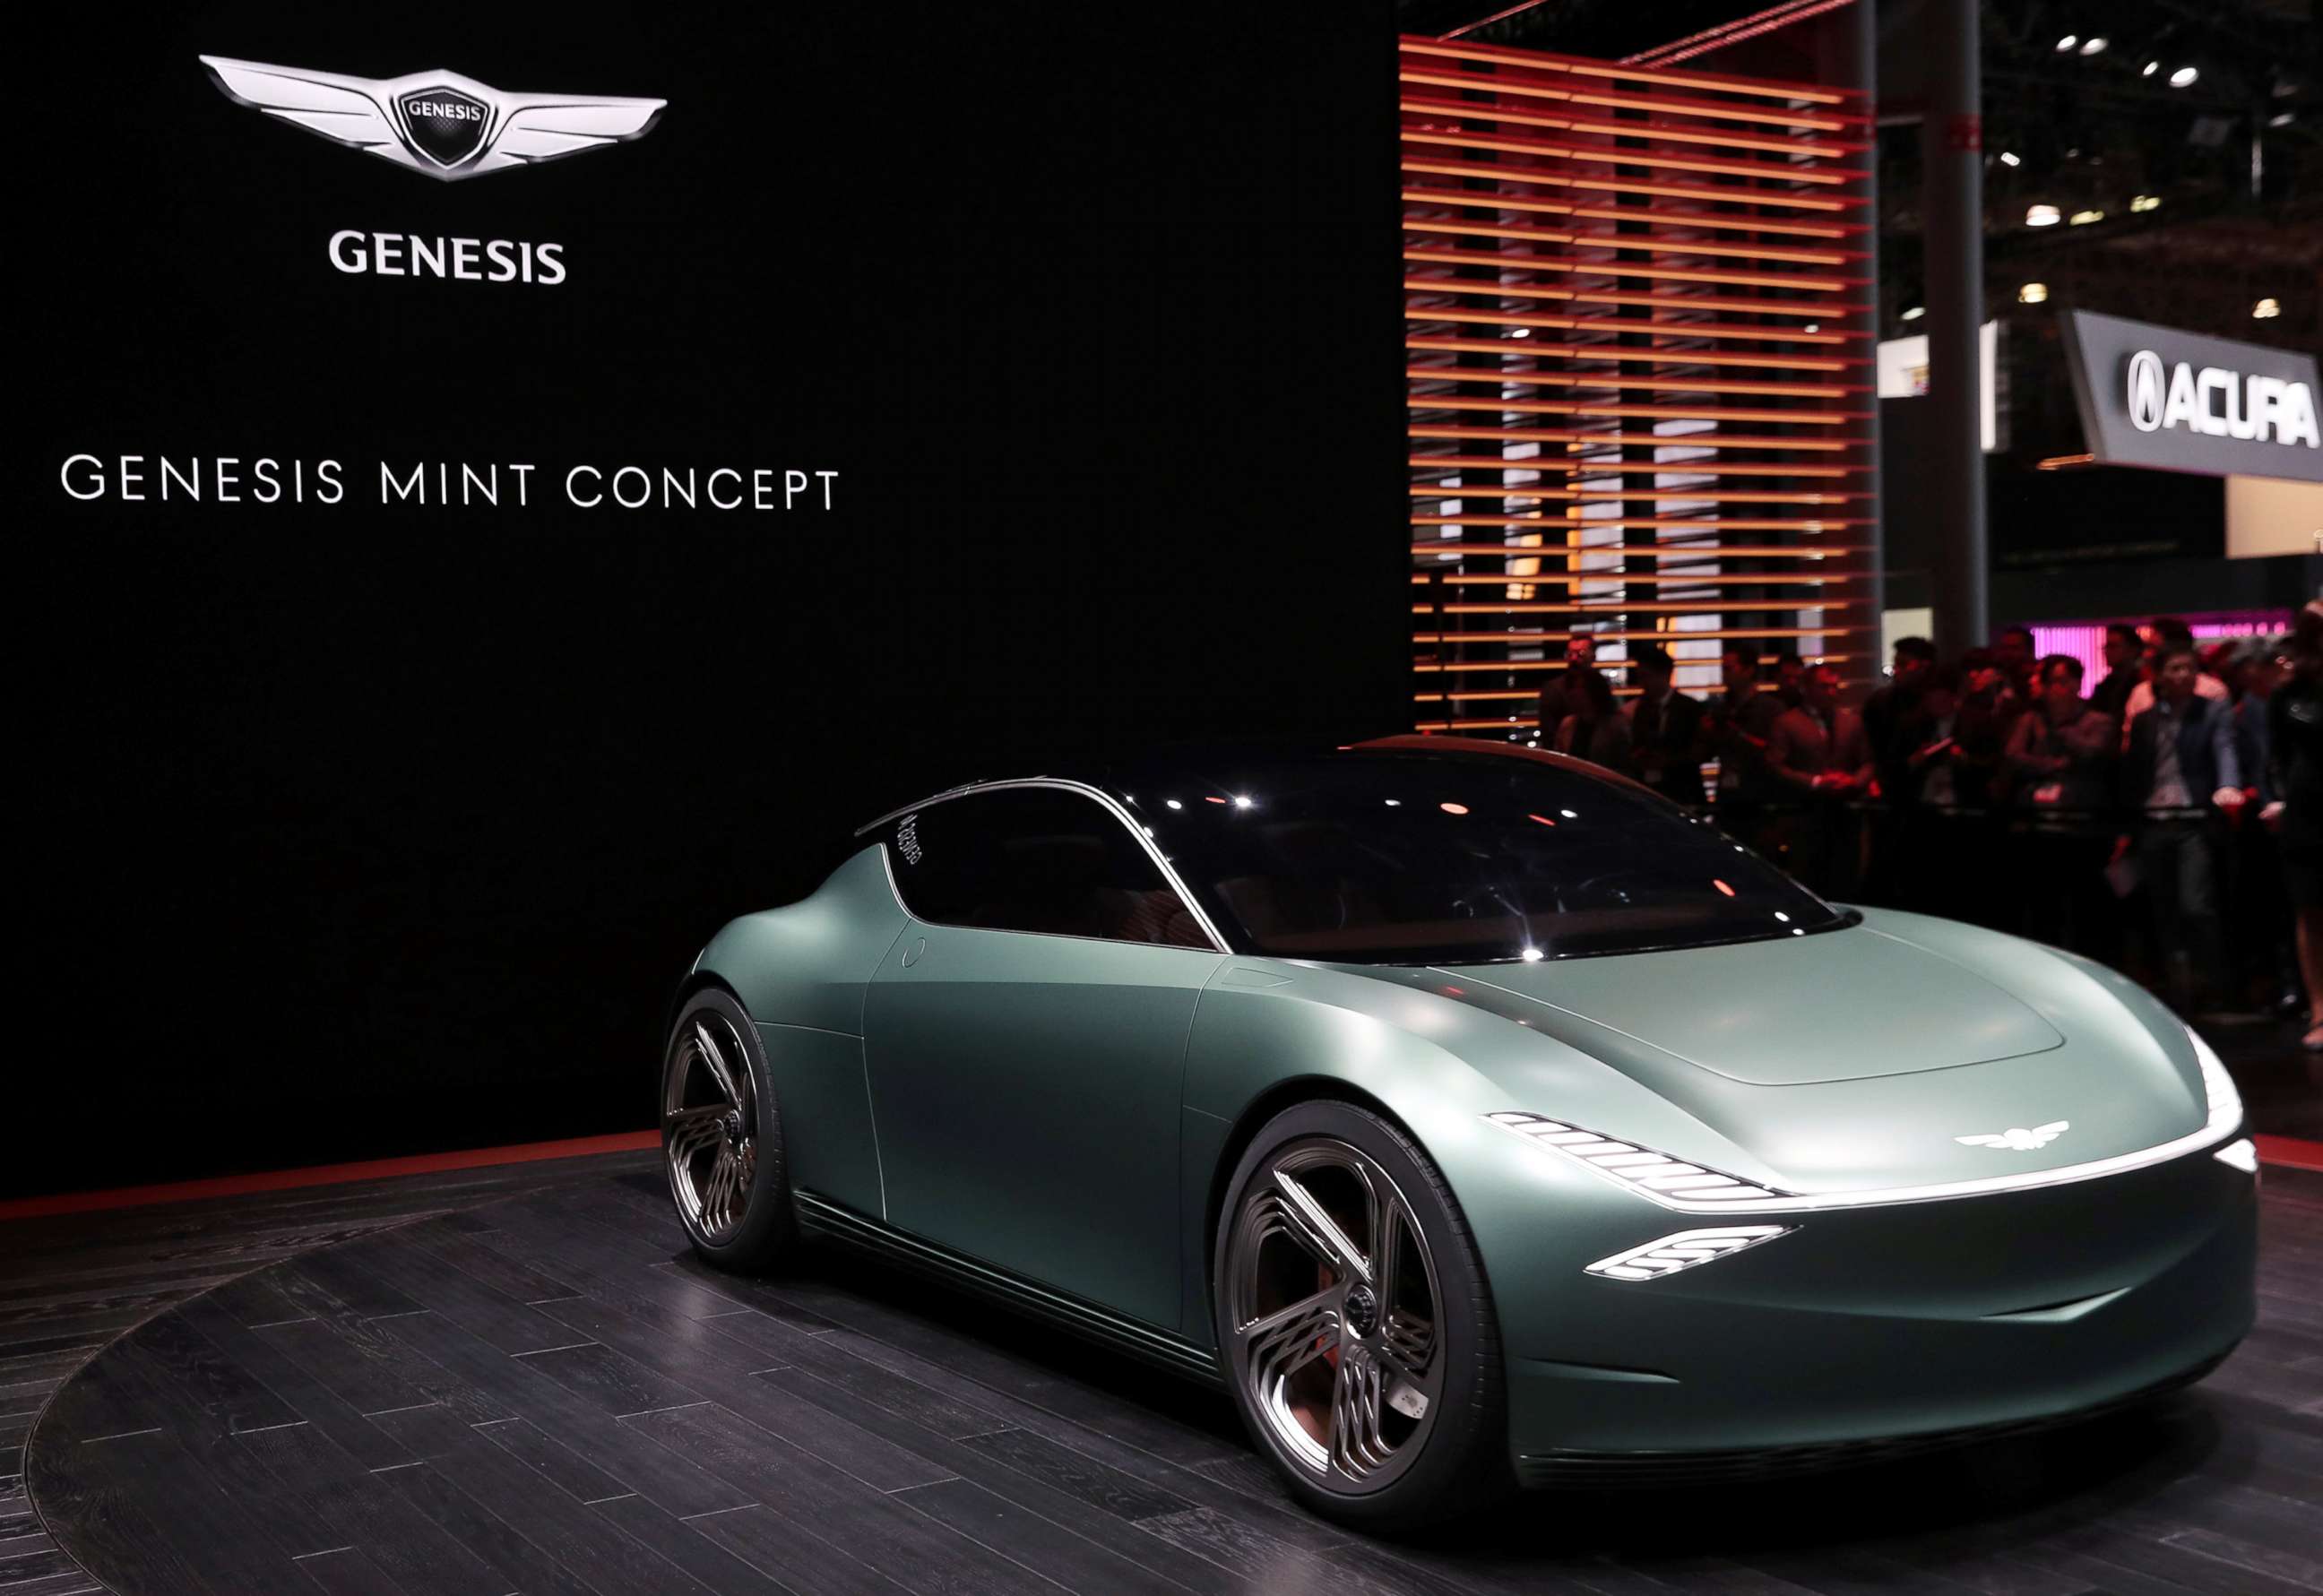 PHOTO: The Genesis Mint concept car is revealed at the 2019 New York International Auto Show in New York City, April 17, 2019.